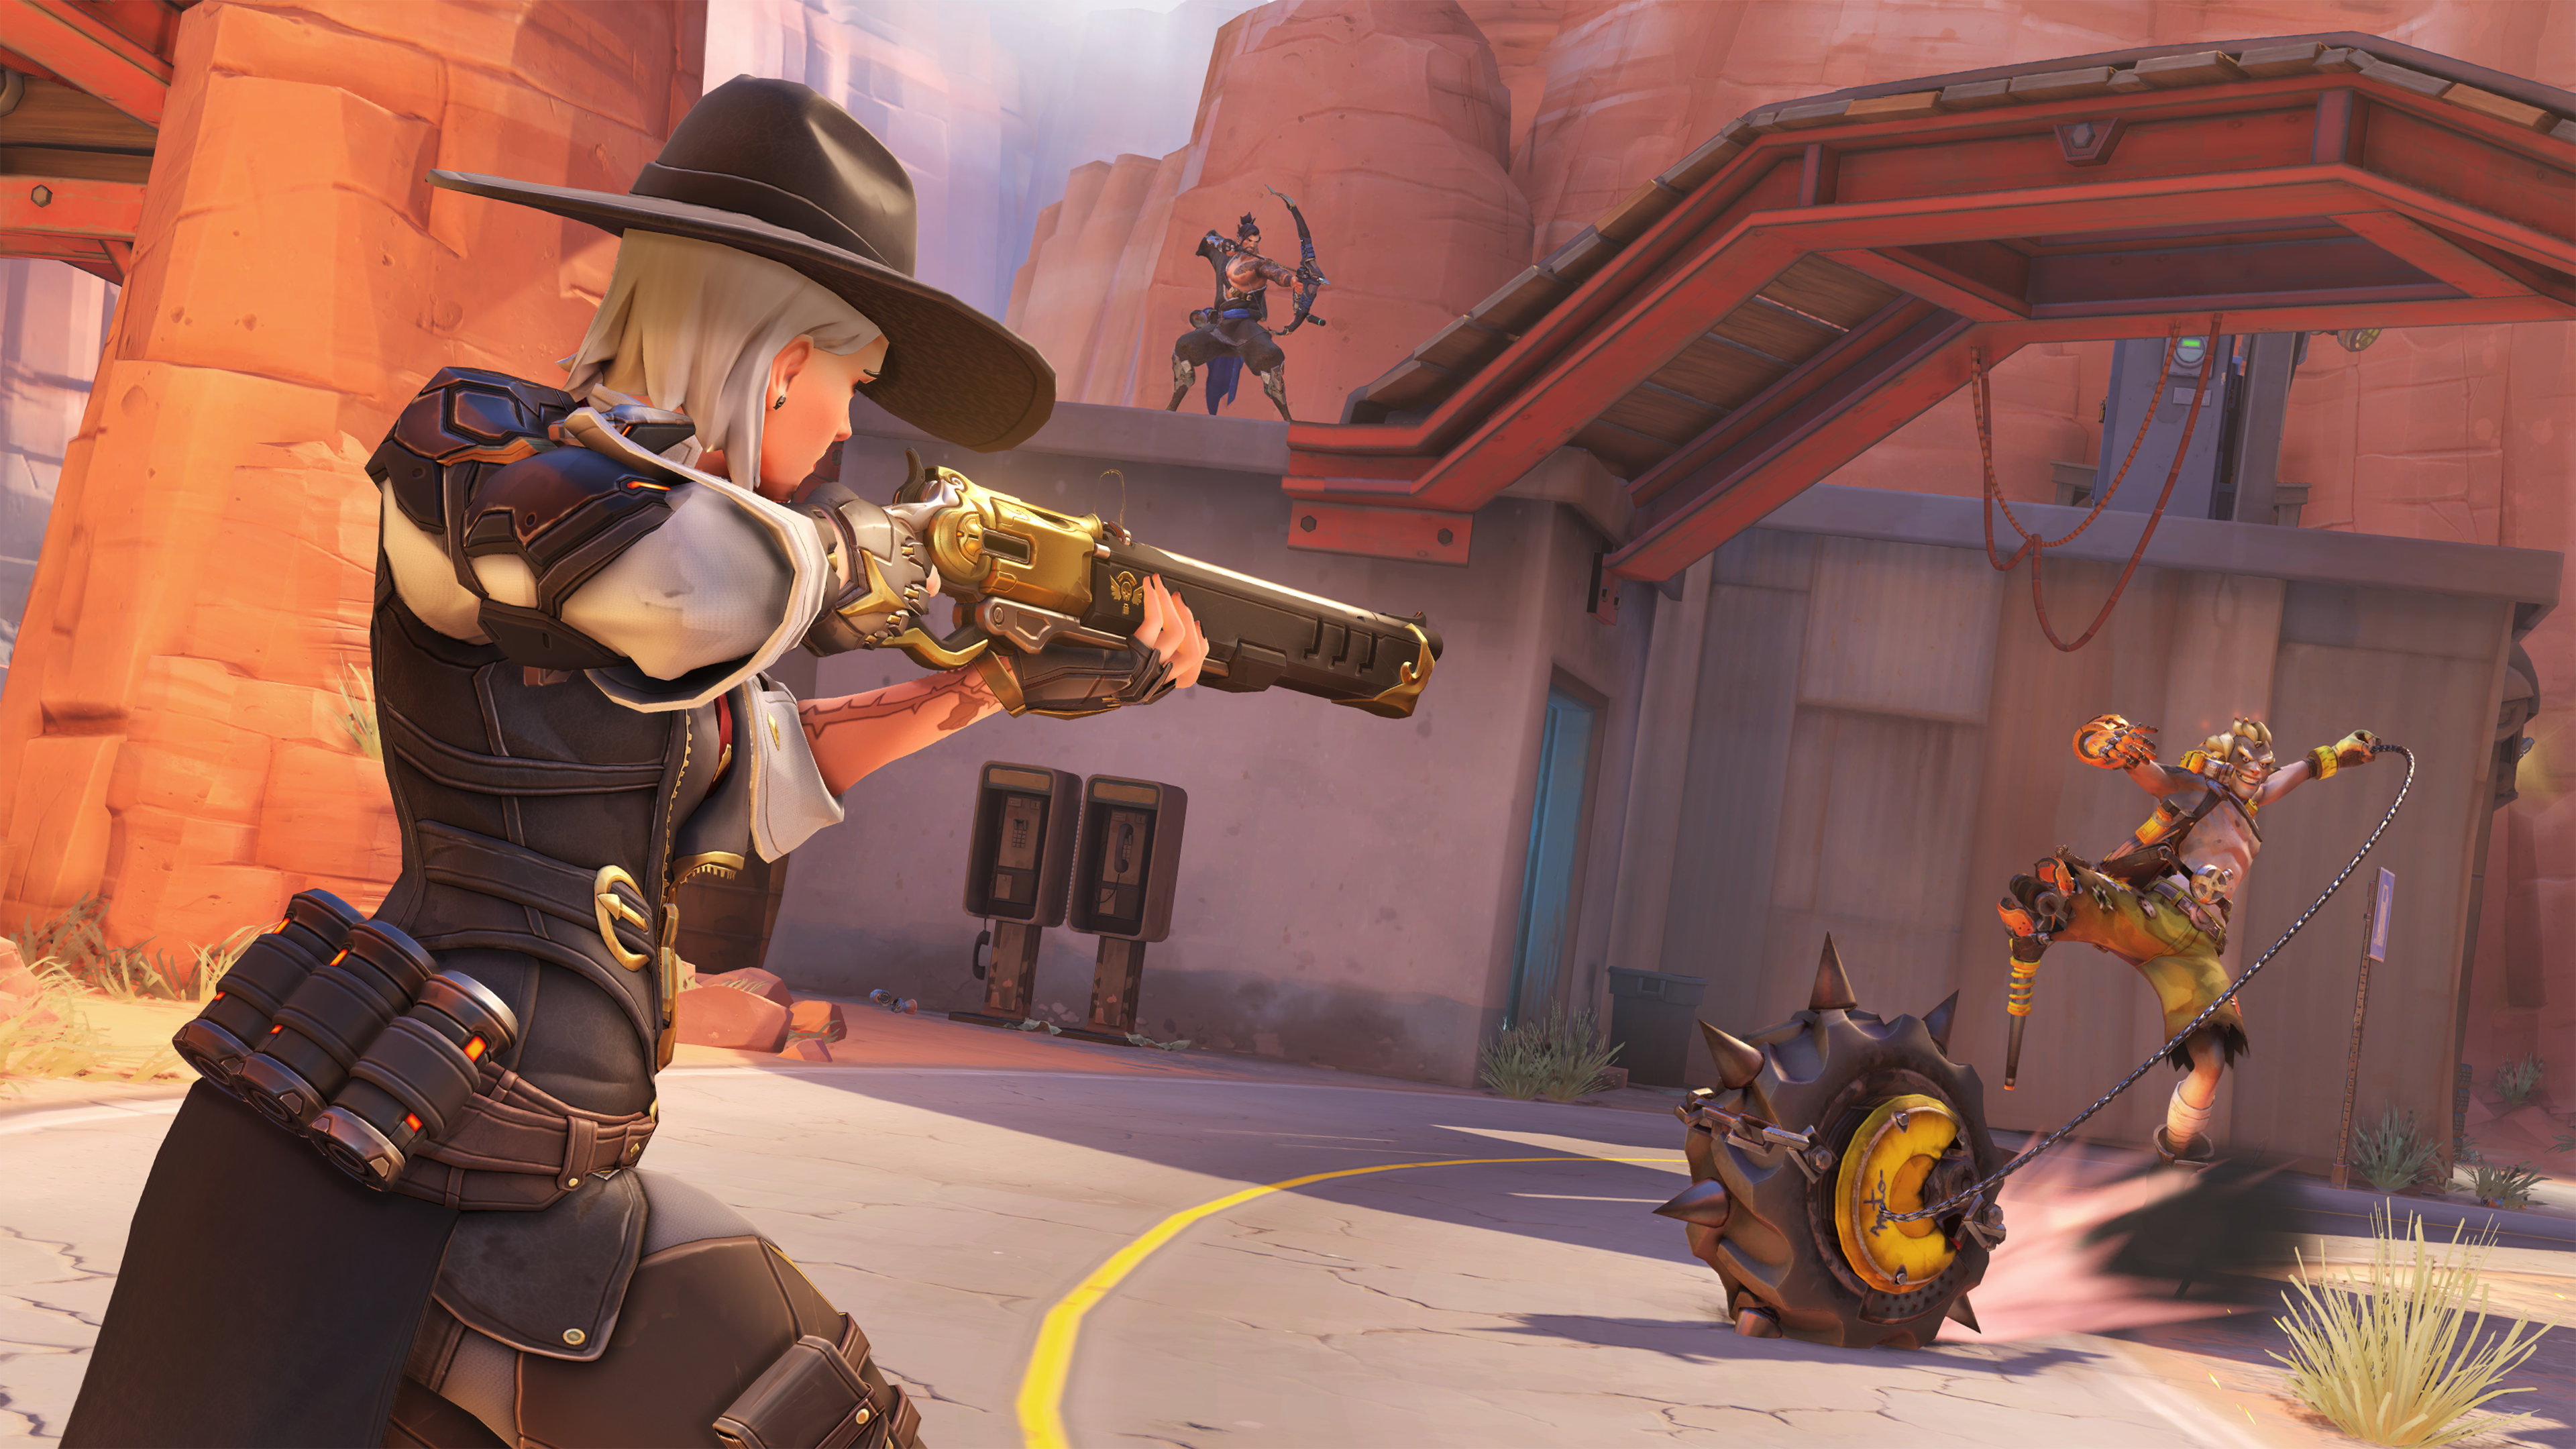 Overwatch creator admits Ashe’s aim is broken, says a fix is coming ...
